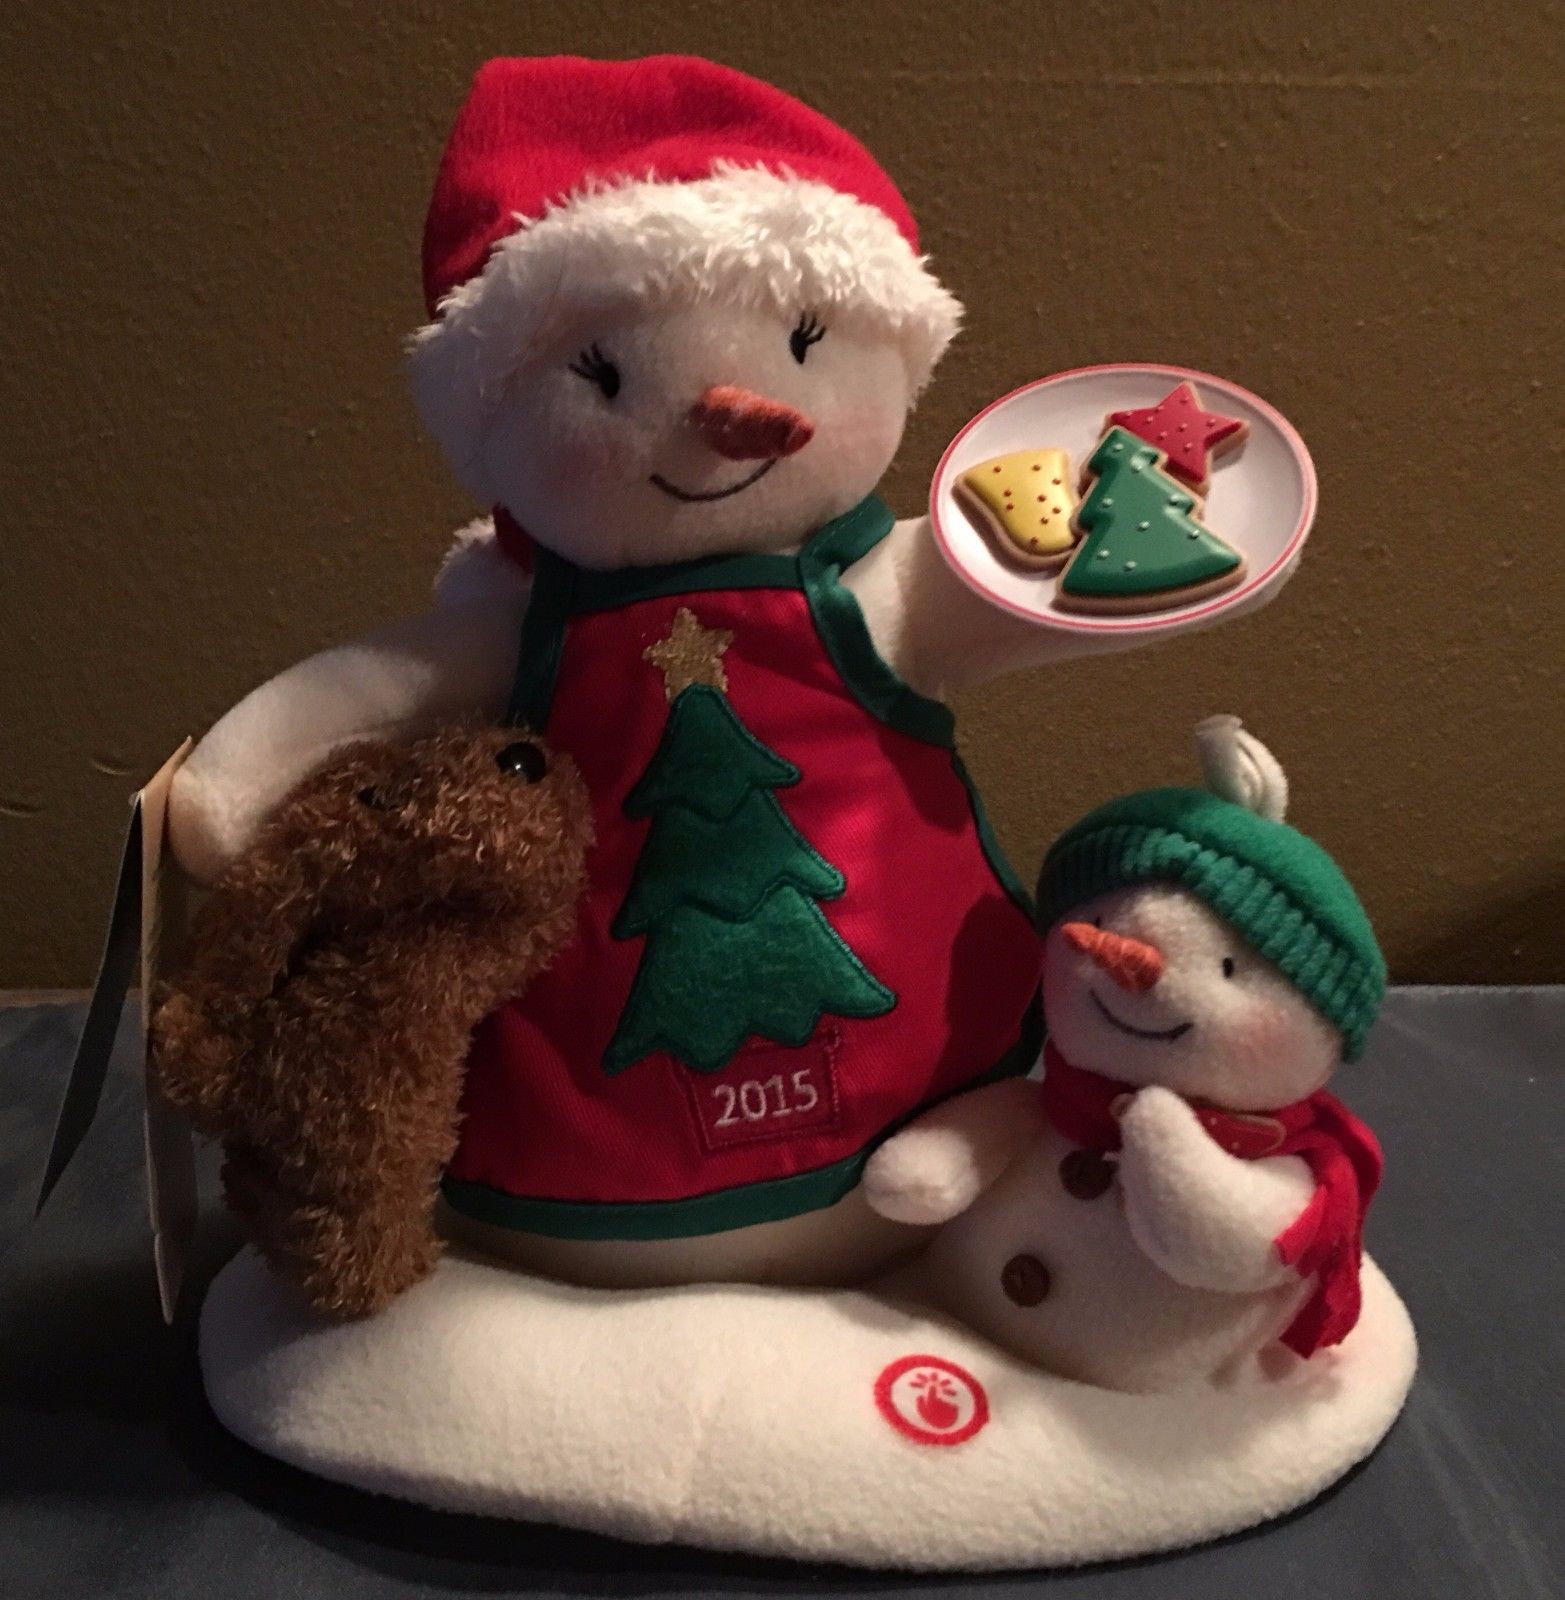 2015 Hallmark Animated NWT Plush Time for Cookies 12th in Series ...